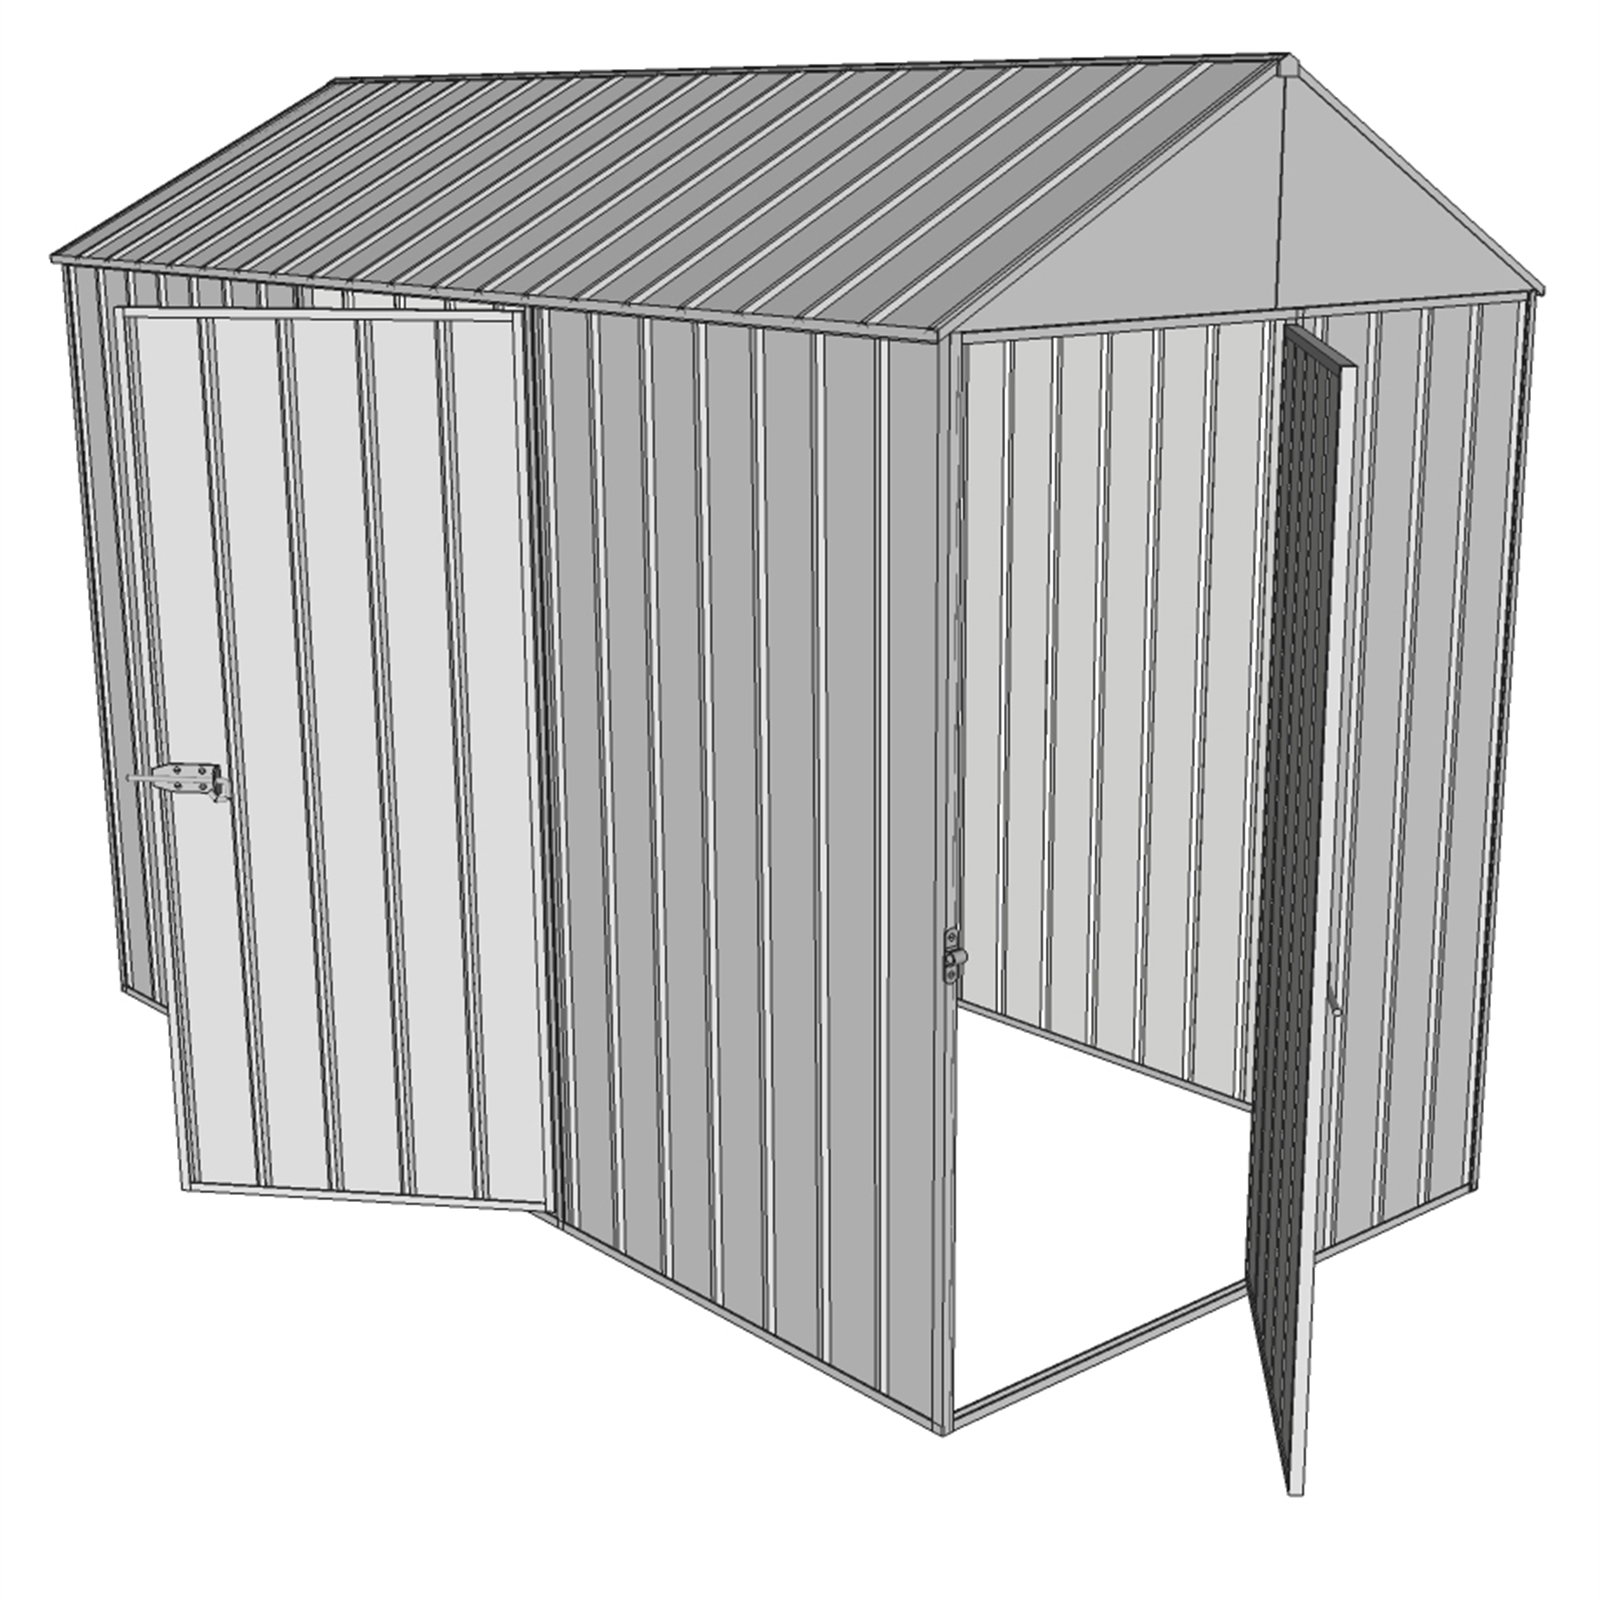 Build-a-Shed 1.5 x 2.3 x 3.0m Zinc Front Gable Two SIngle Hinged Doors Narrow Shed